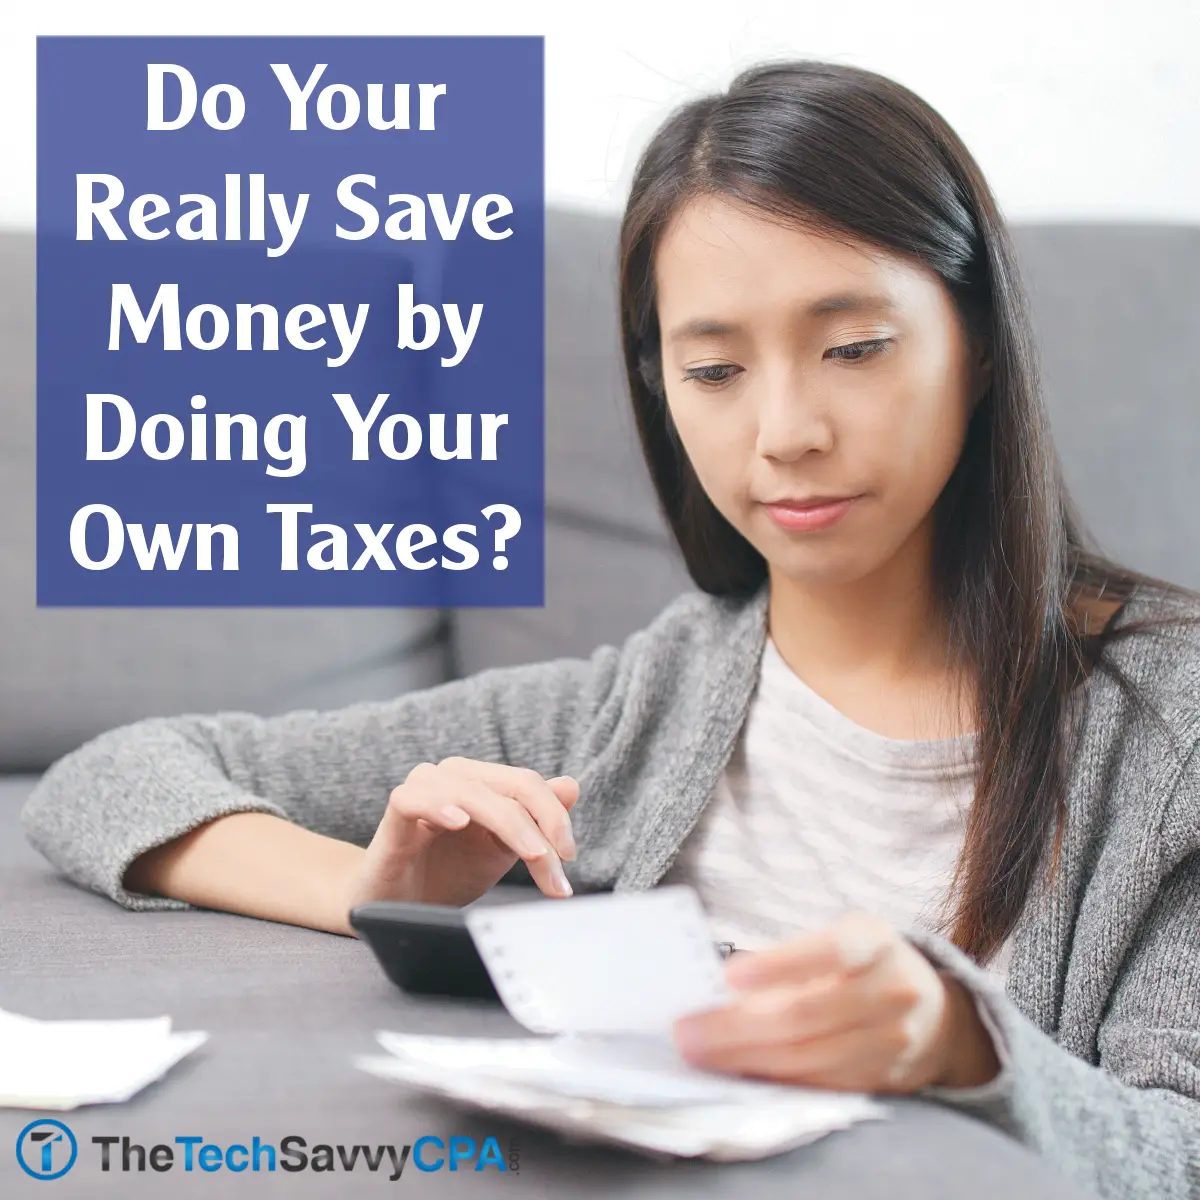 Do Your Really Save Money by Doing Your Own Taxes?